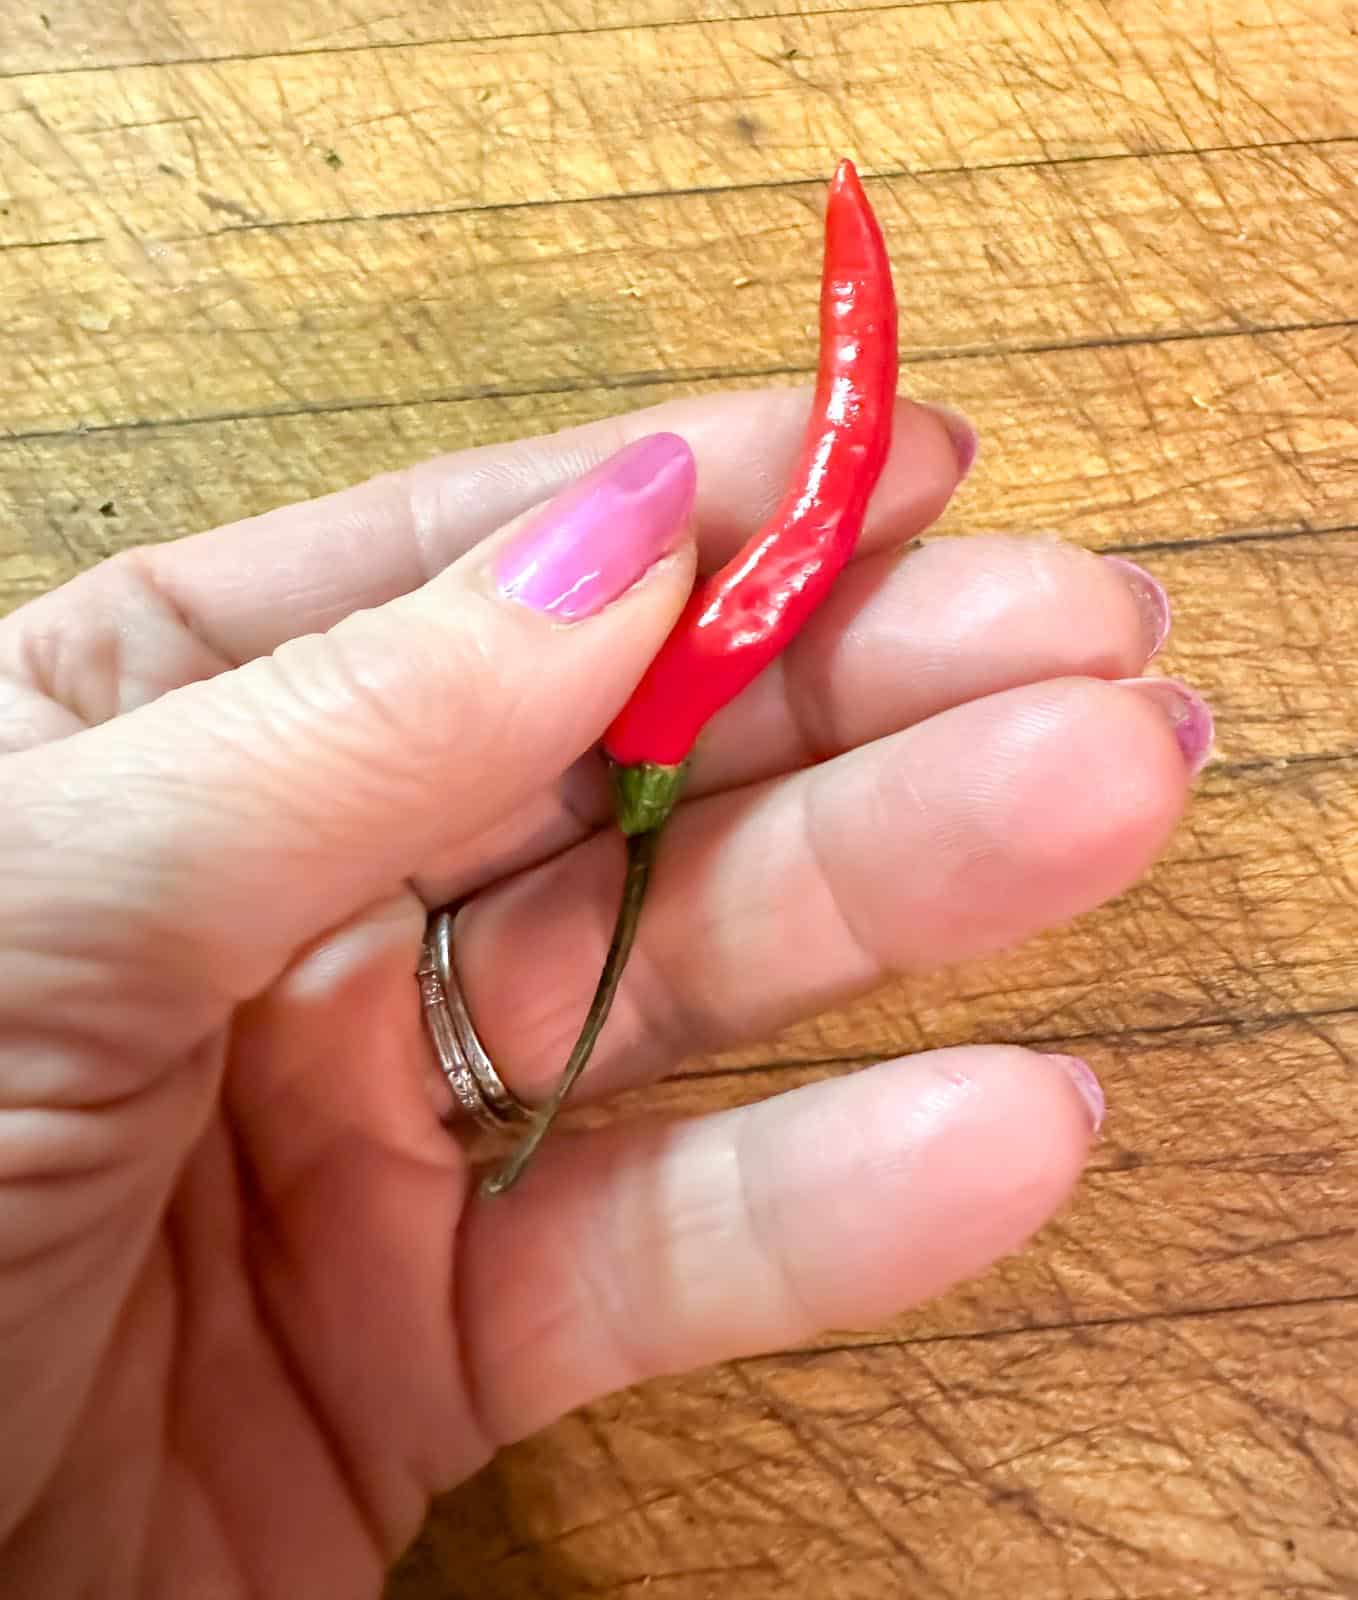 hot red pepper held in hand.